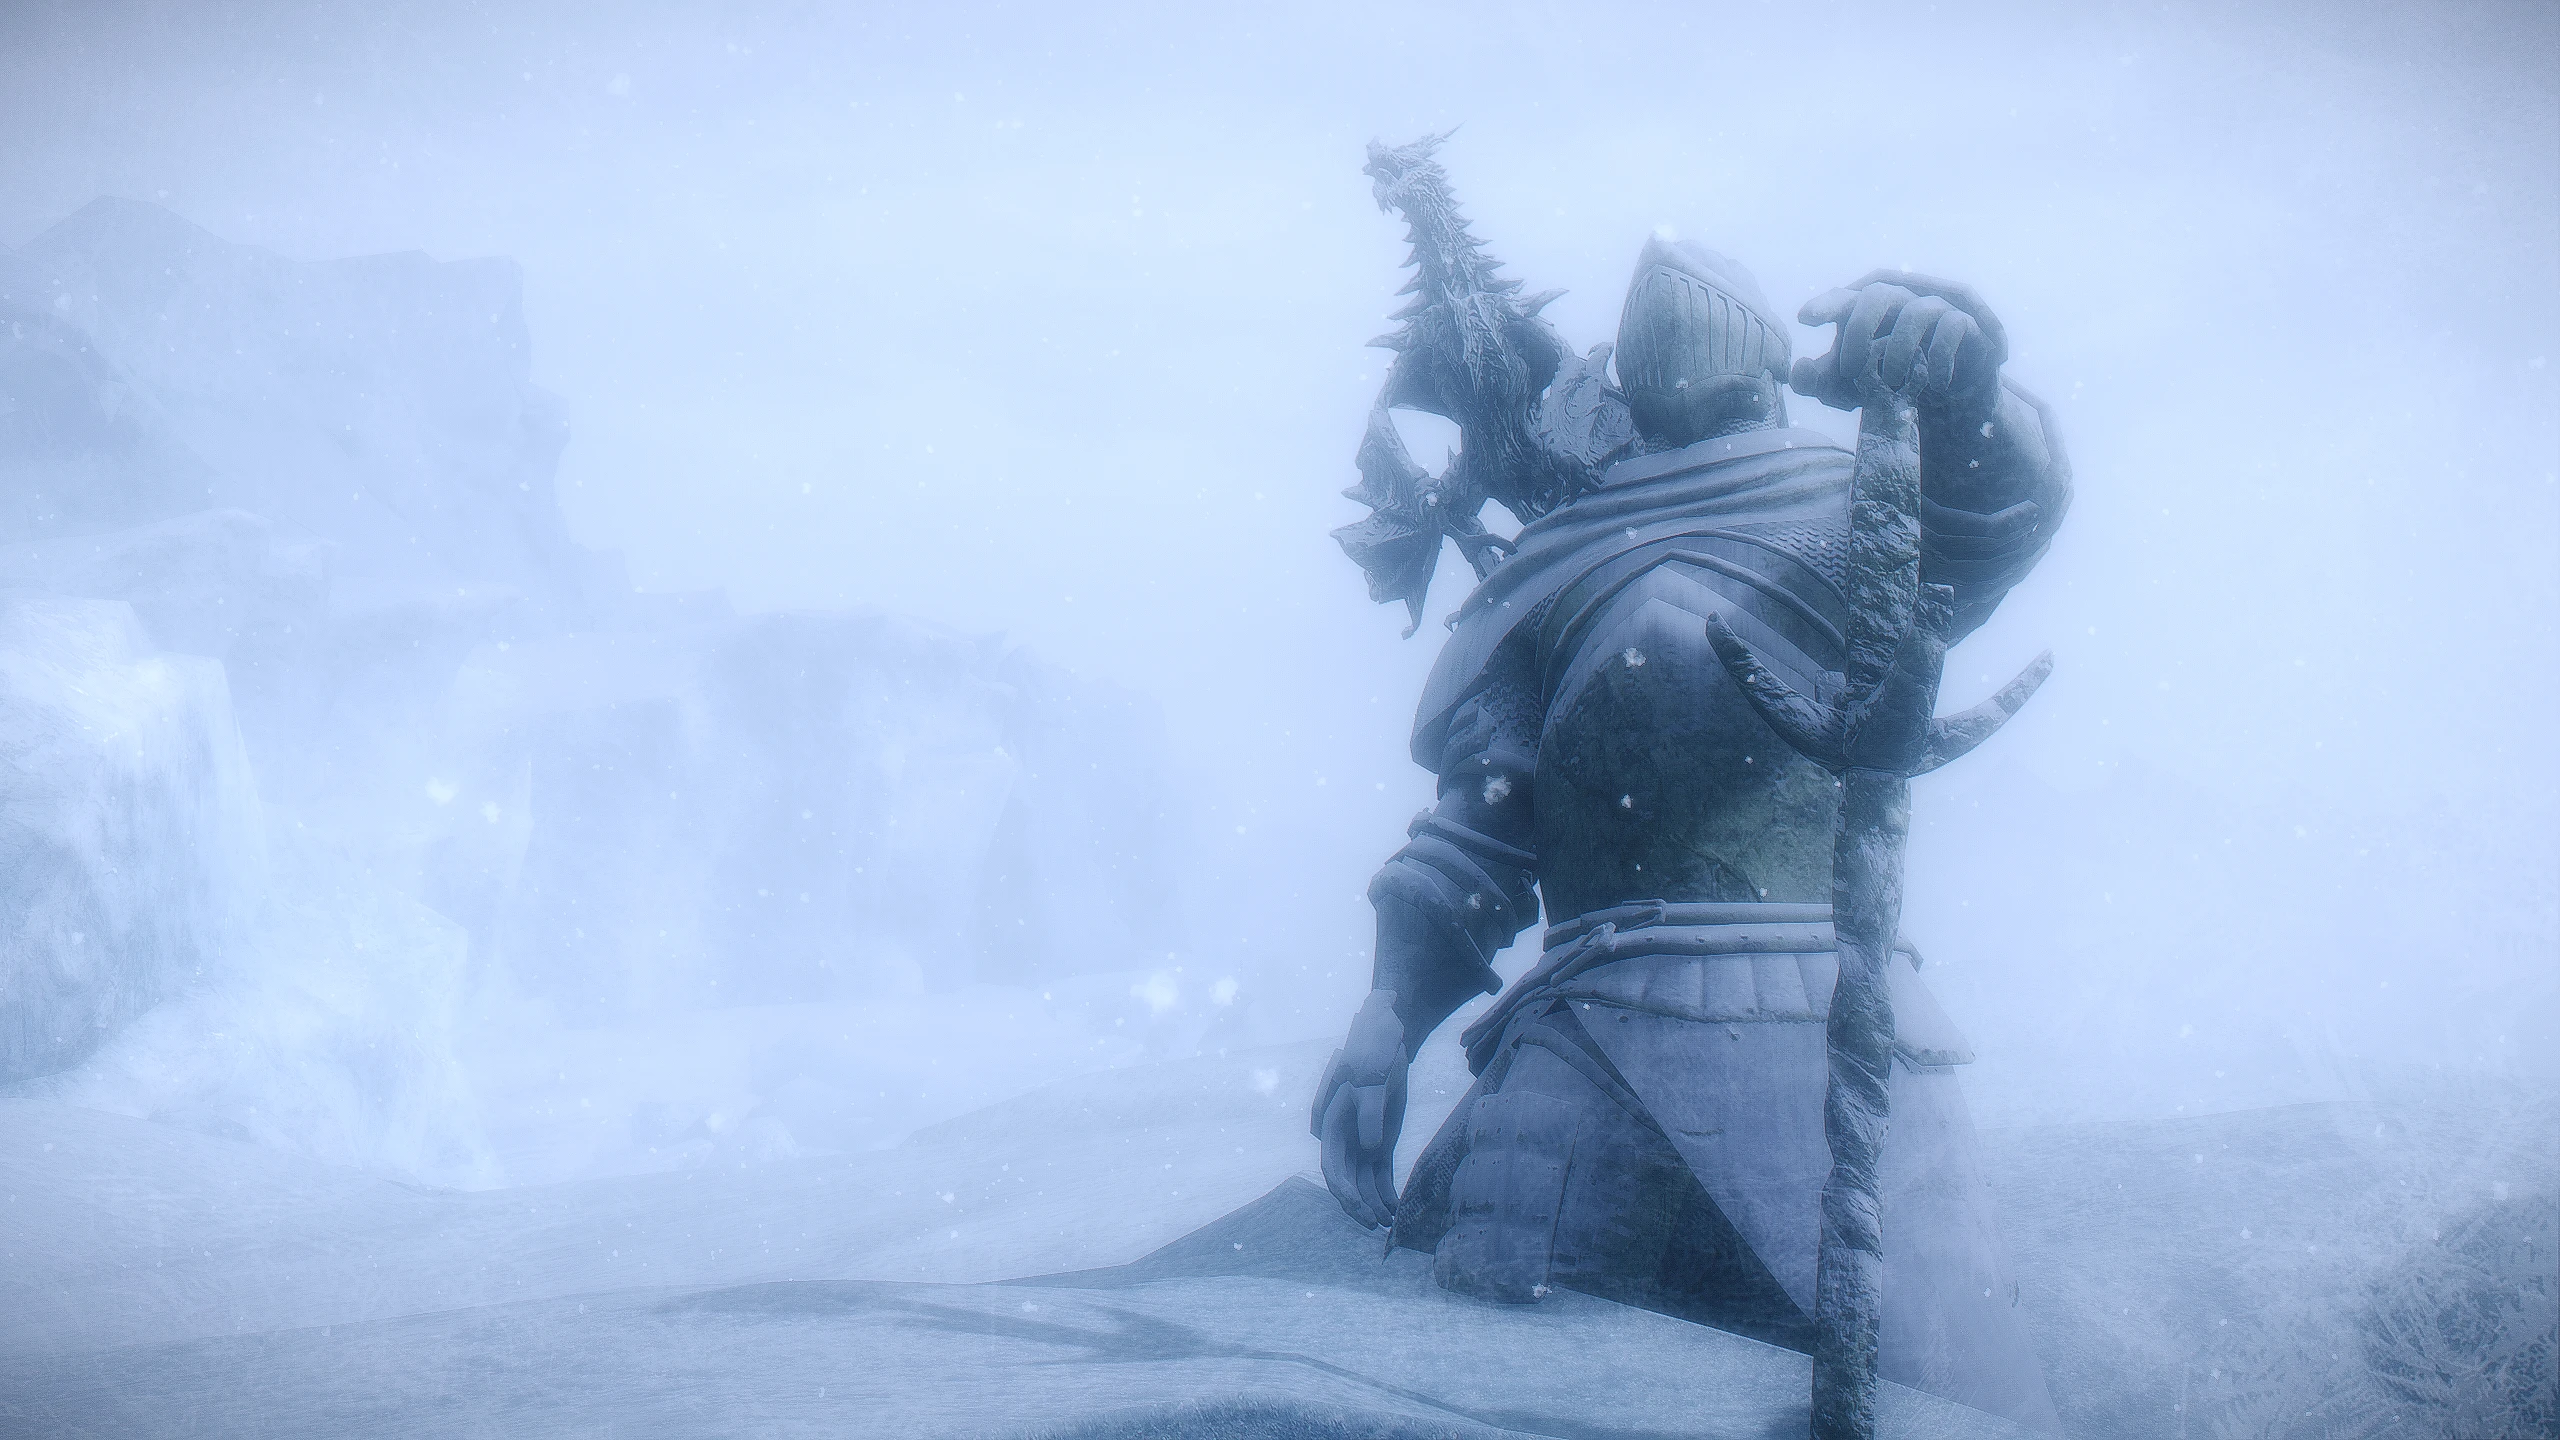 skyrim special edition winter is coming